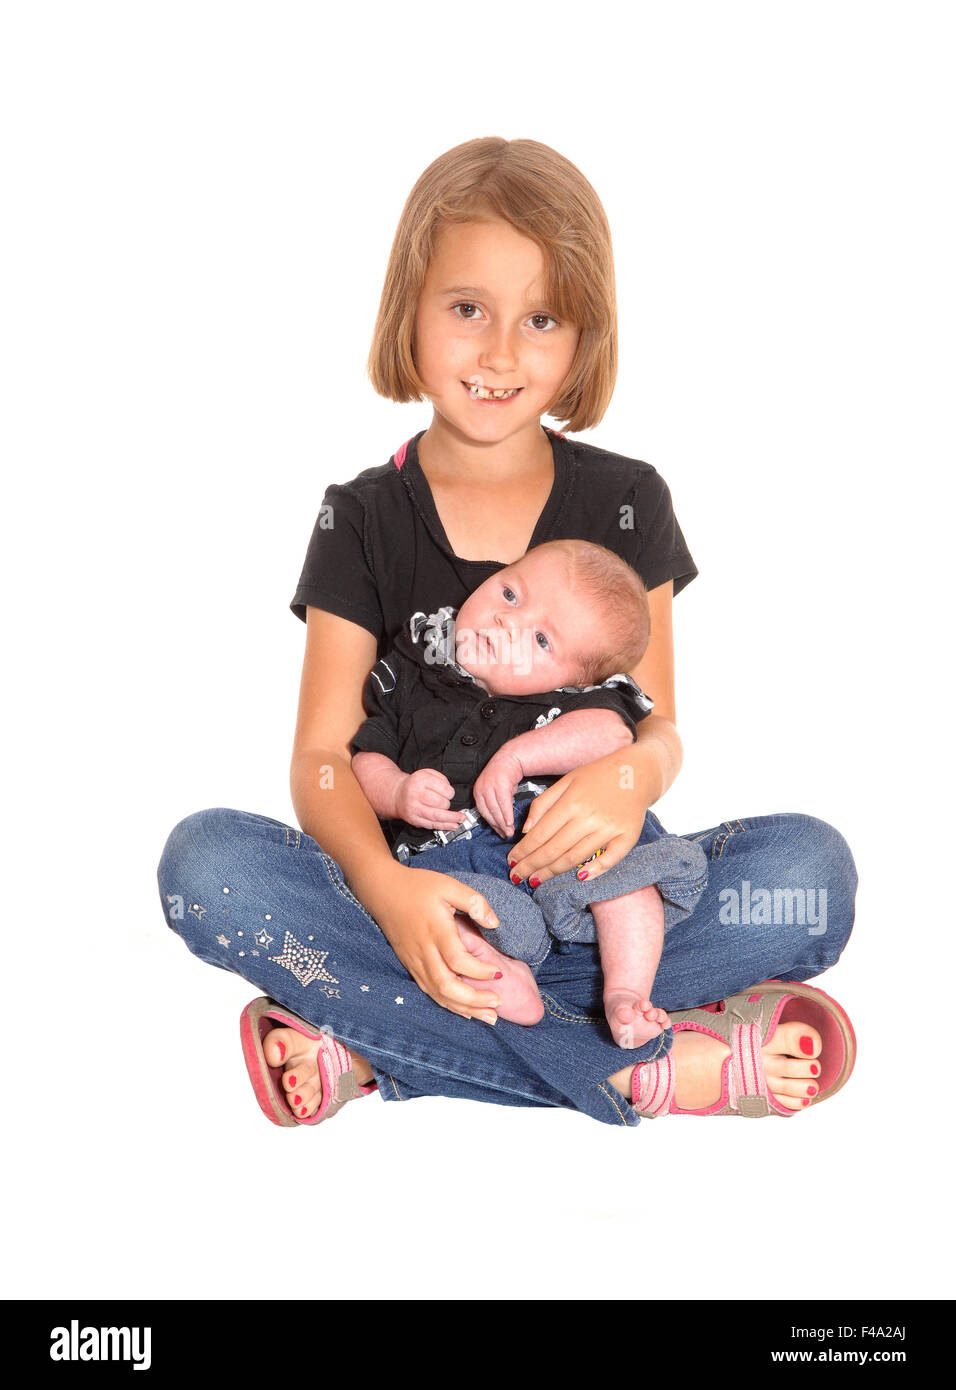 Young girl with three weeks old baby. Stock Photo